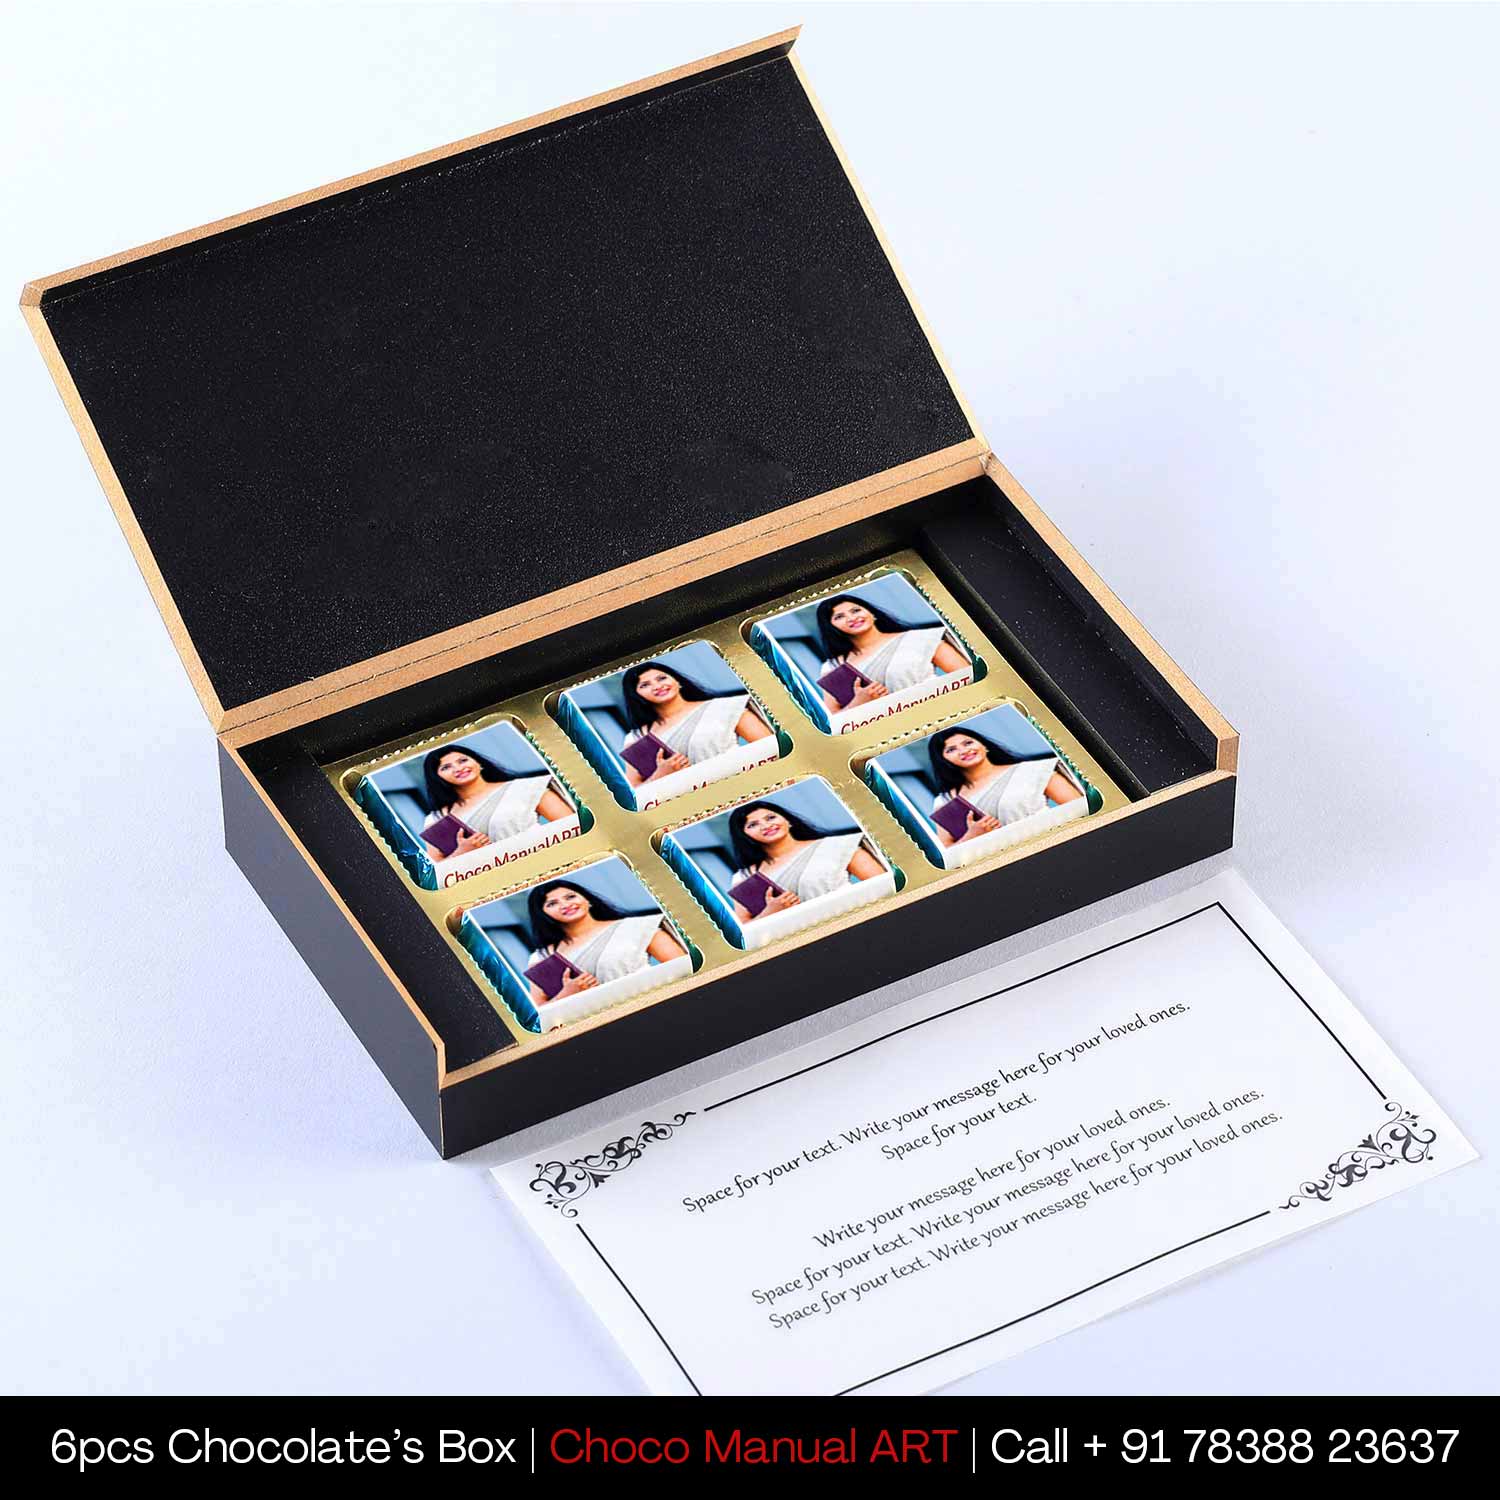 Exoctic women's day gift photo printed chocolates